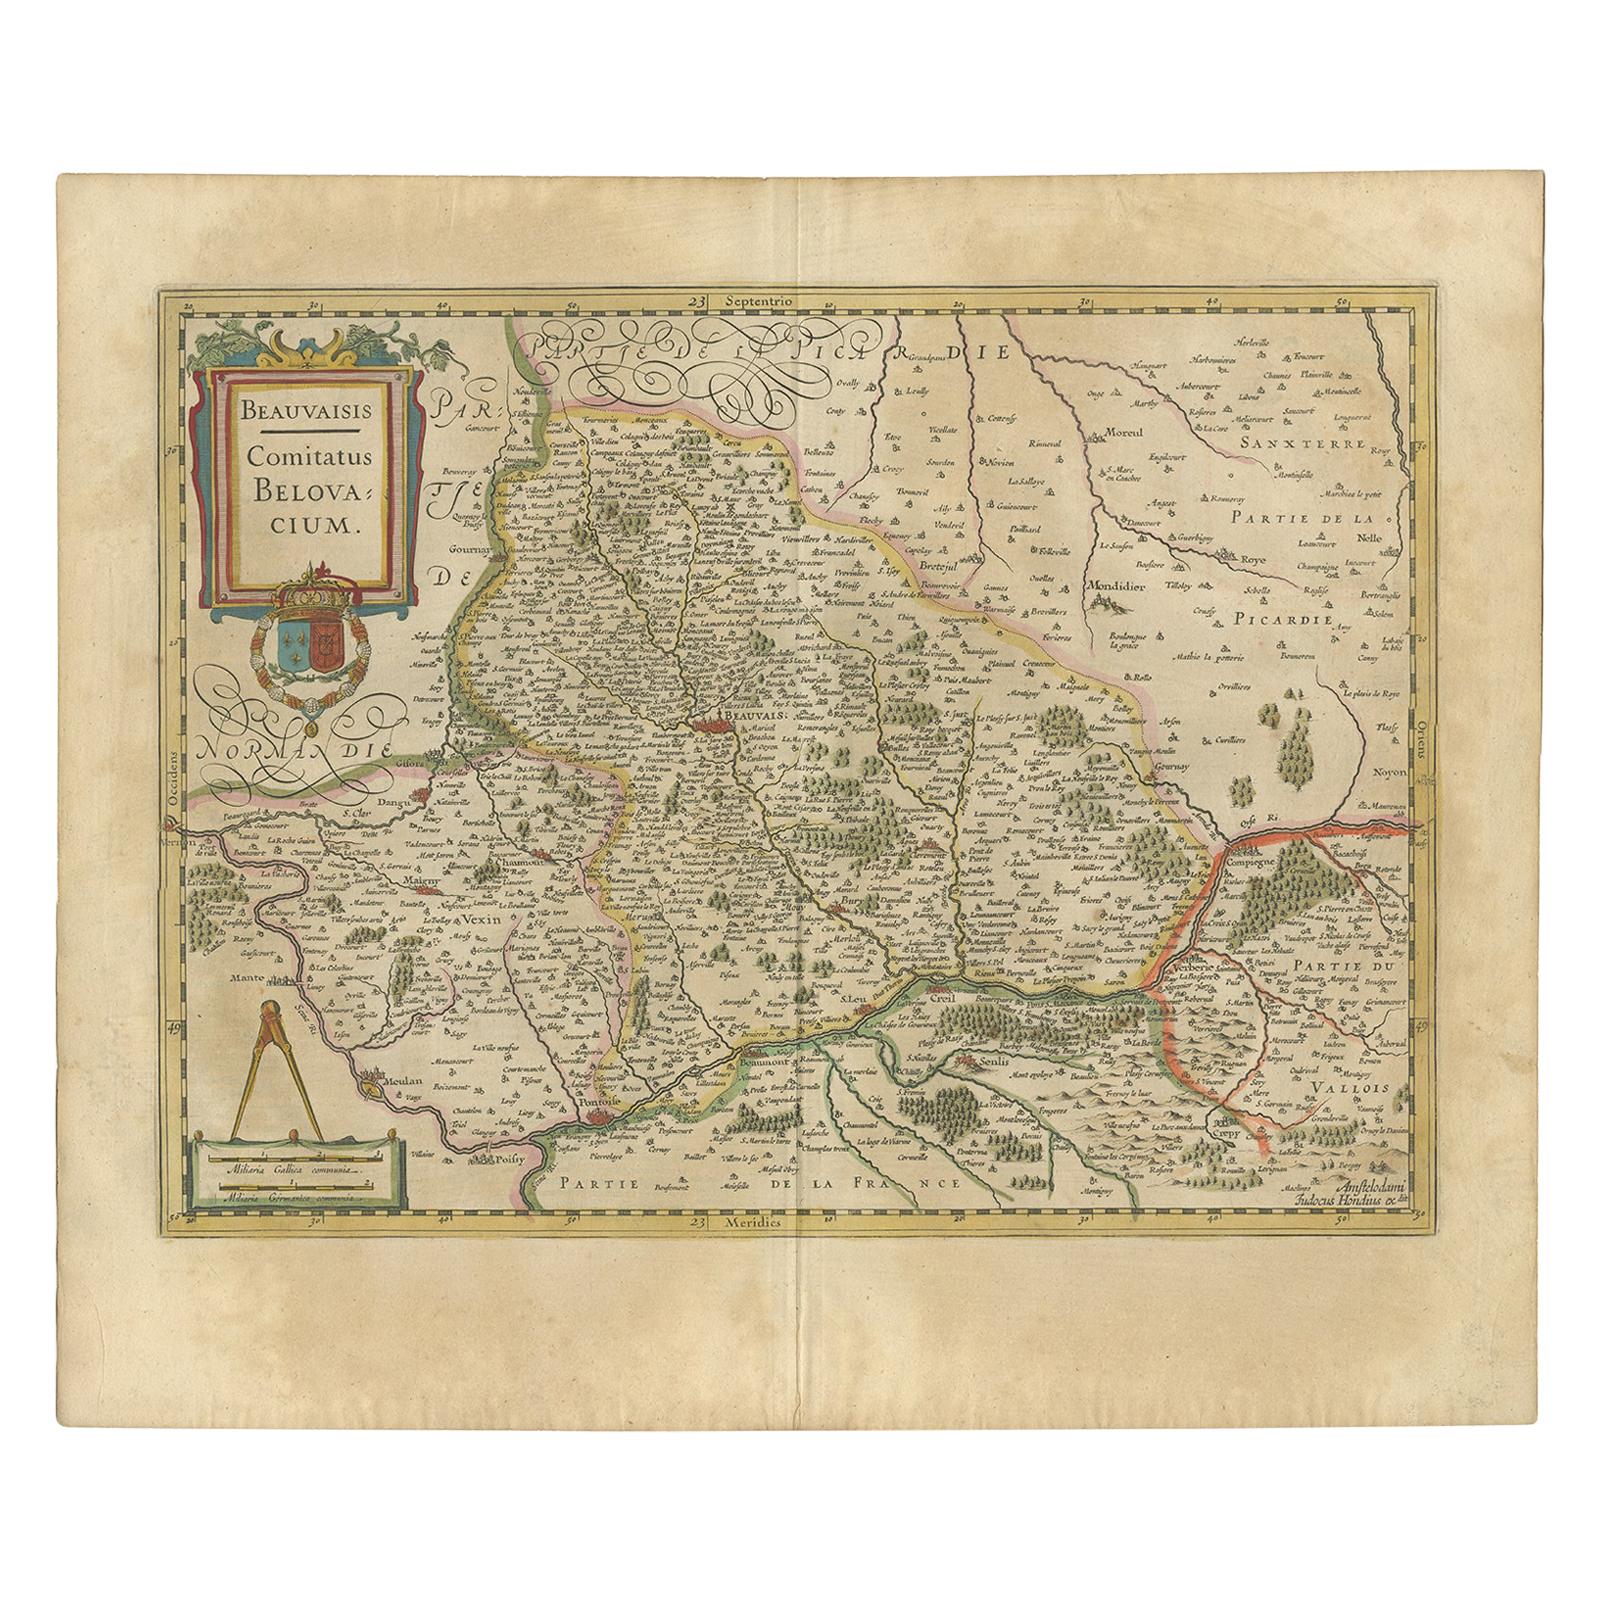 Antique Map of the Region of Beauvais by Hondius, circa 1630